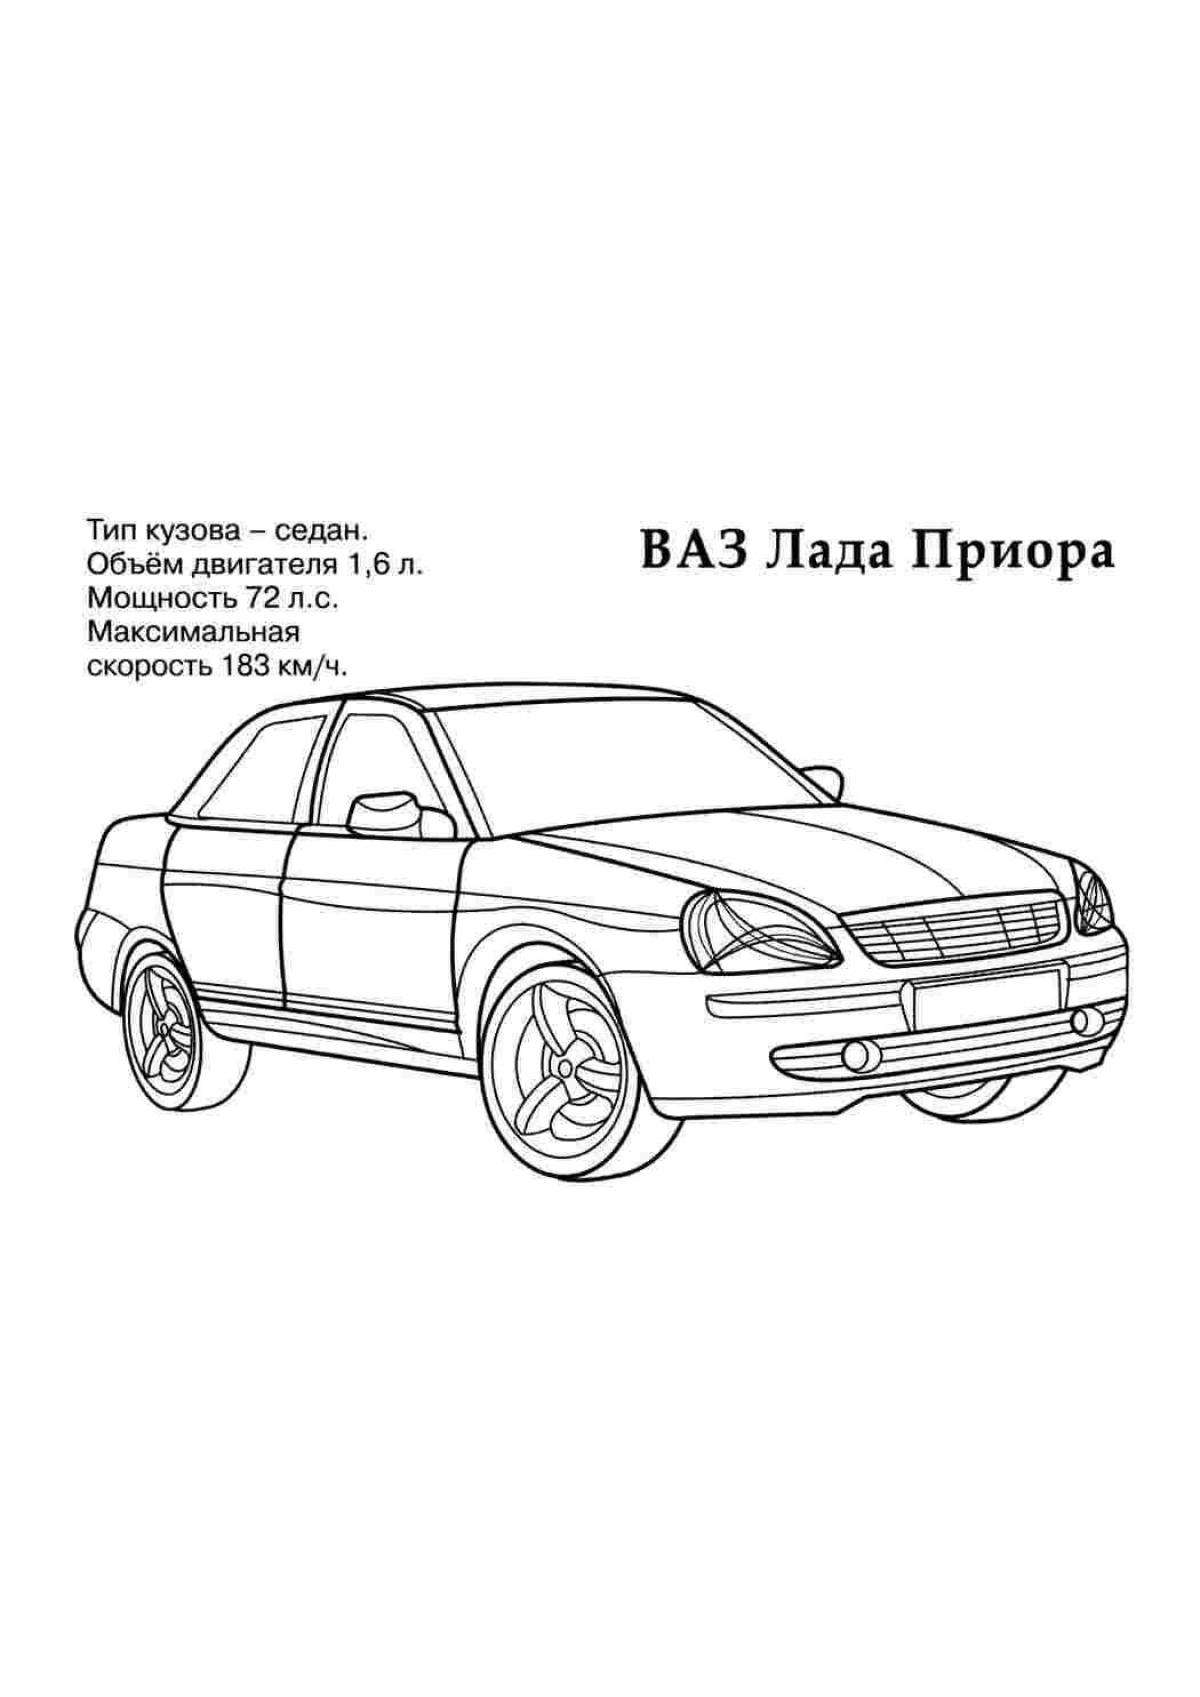 Attractive cars coloring pages for boys